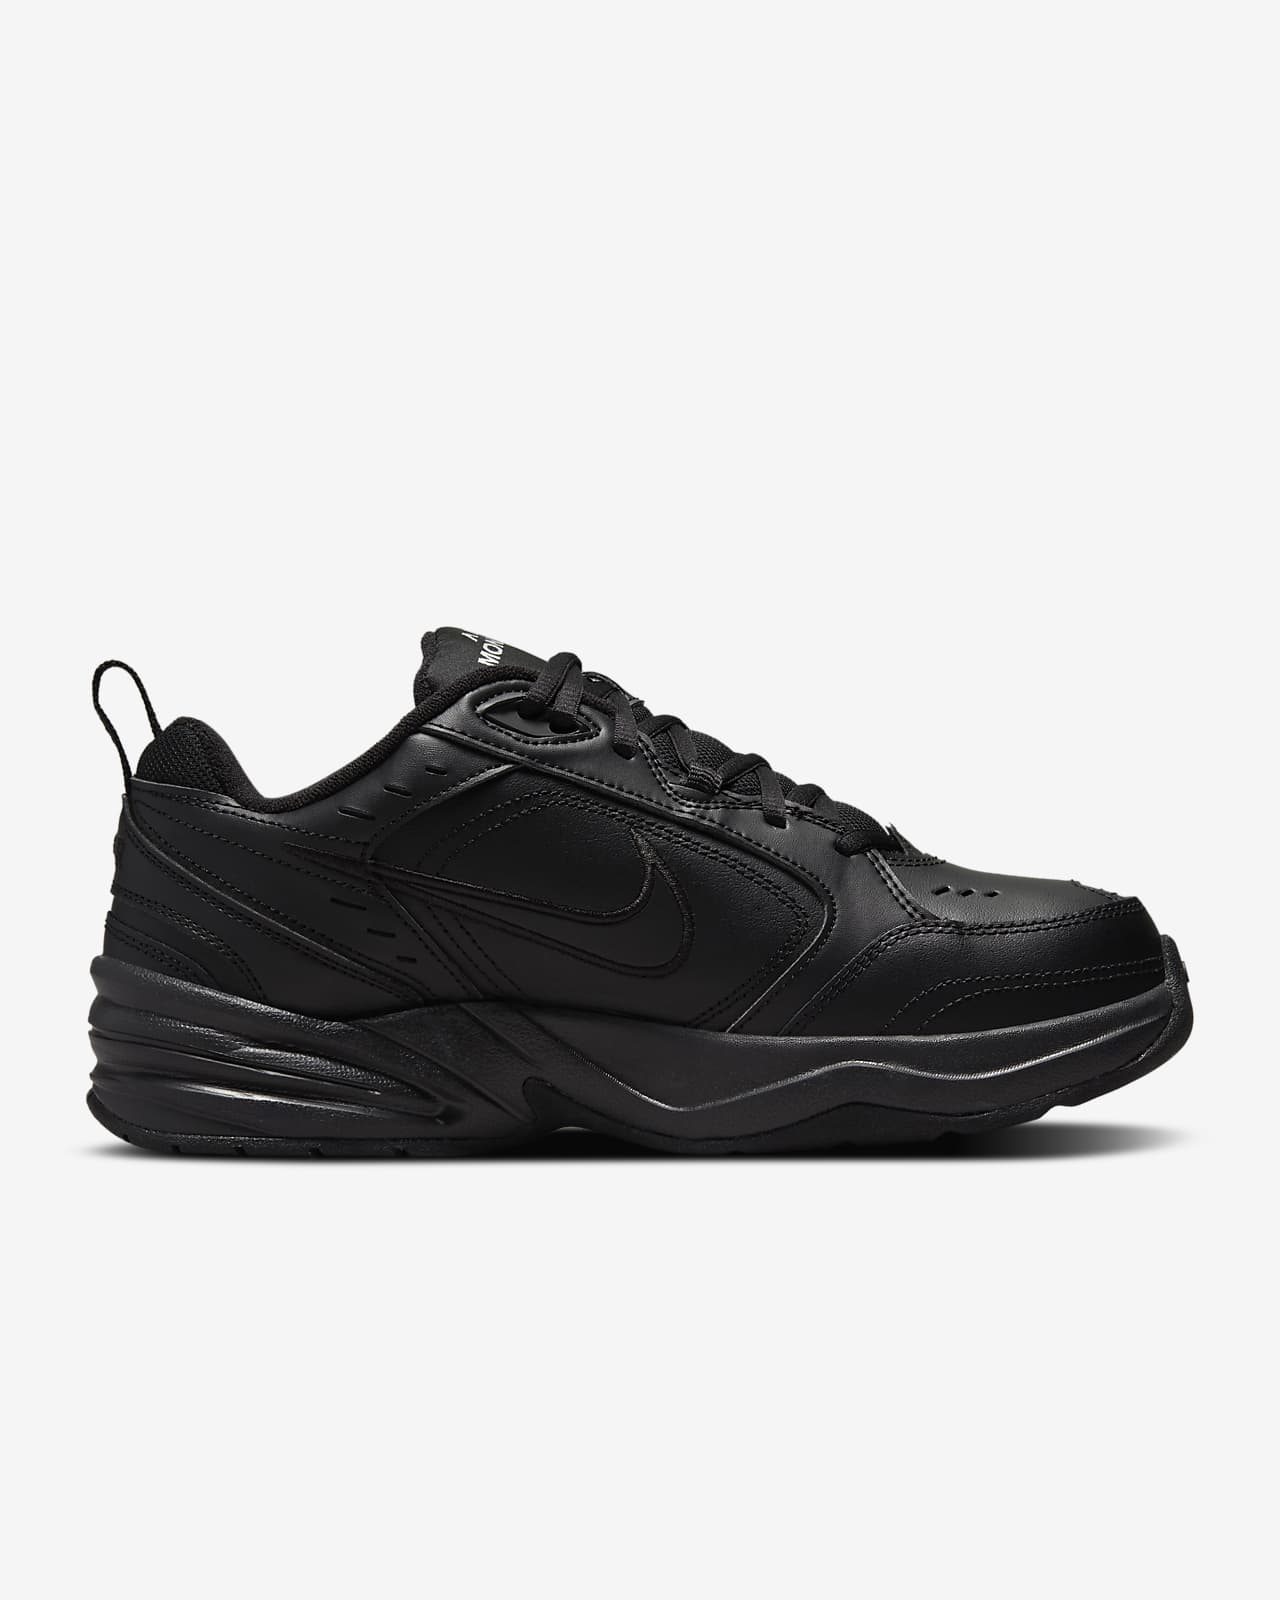 Nike Air Monarch IV Men's Training Shoe (Extra Wide).